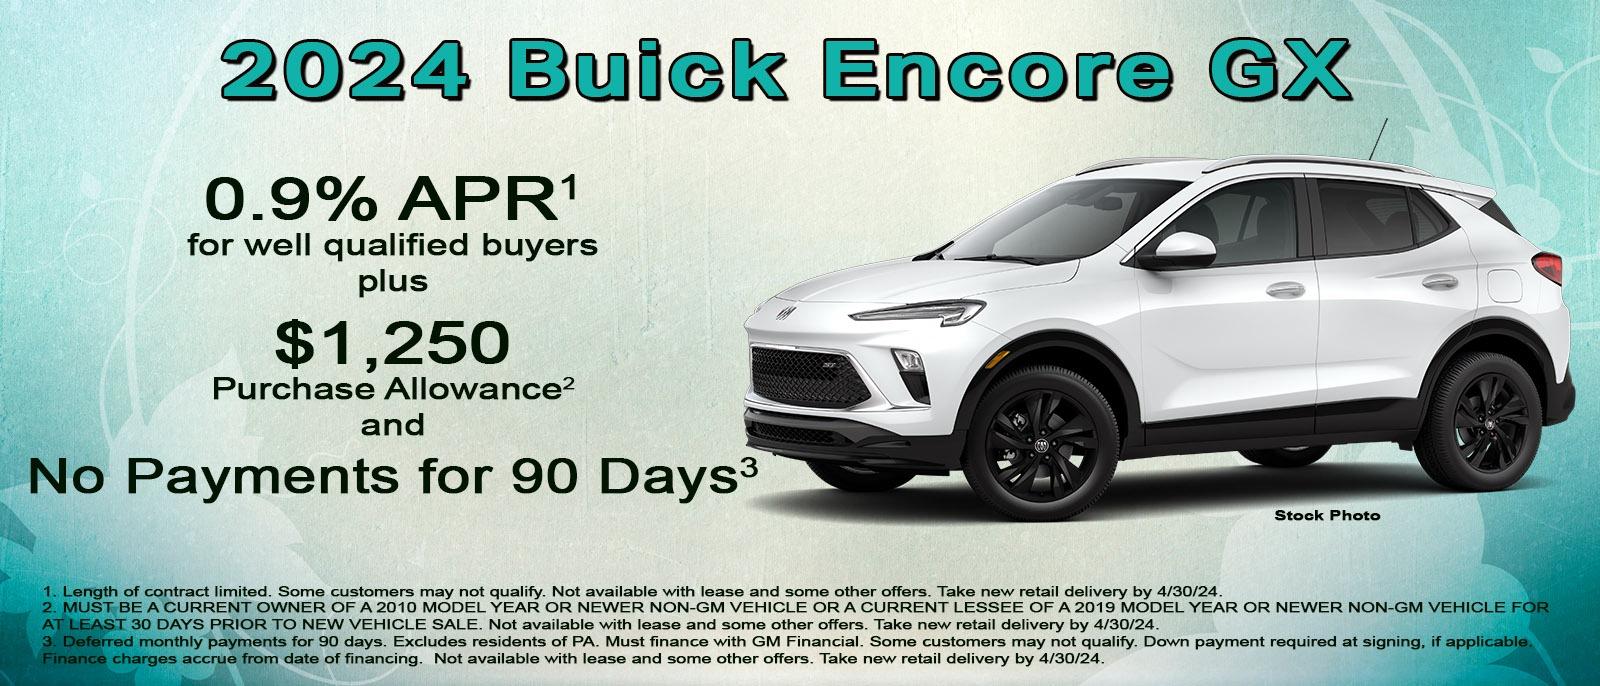 No payments for 90 days on your new Buick Encore GX